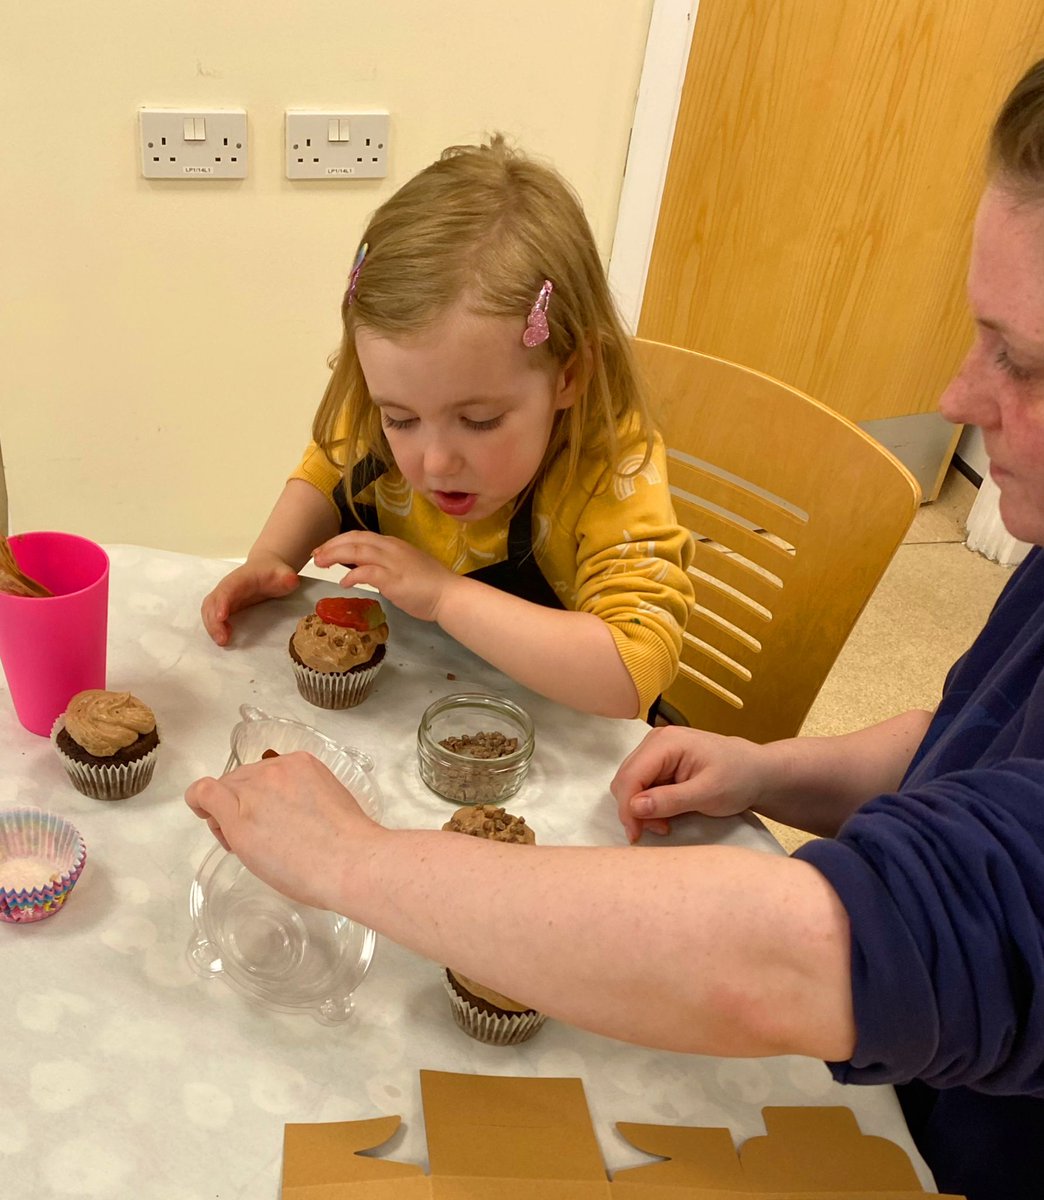 Do you have an interest in food, learning to cook or bake and more importantly helping others?  Our #pretendychef Programme is looking to expand our team to support our schools and community programme across Newcastle and North Tyneside. FIND OUT MORE
quadrantleisure.org/work-with-us